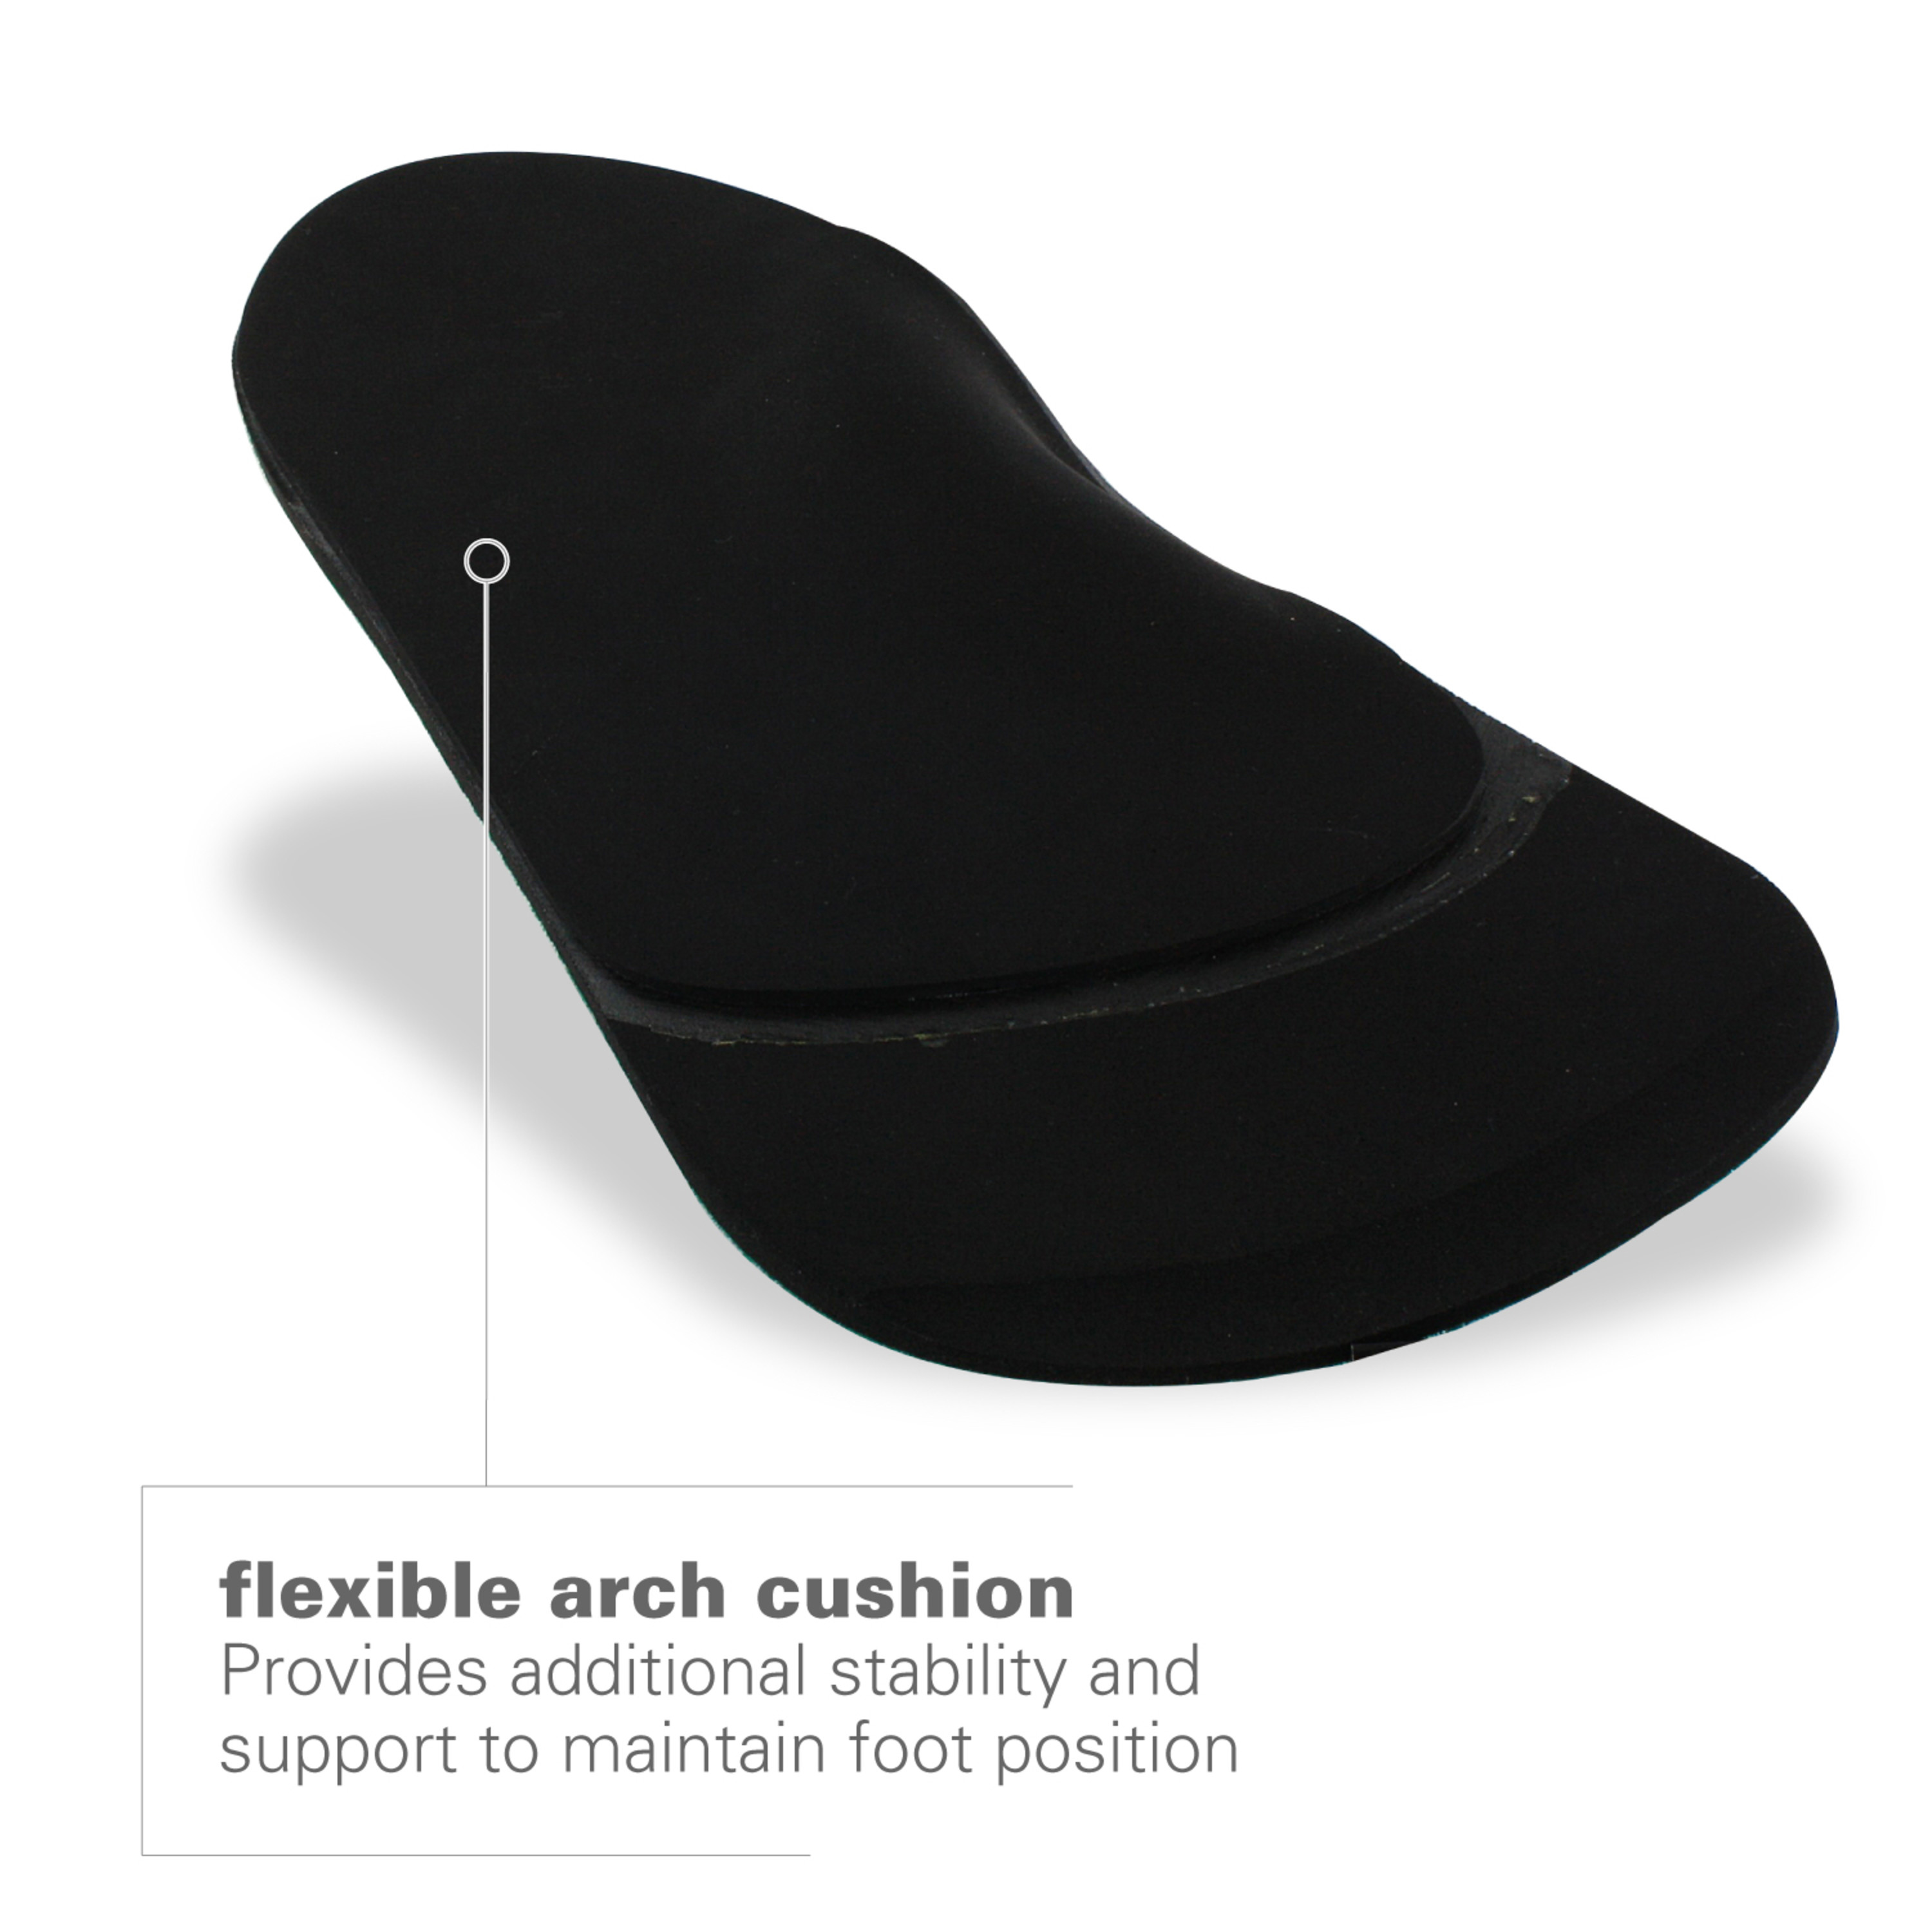 Spenco Rx Arch Cushions 3/4 Length Insole - image 5 of 7